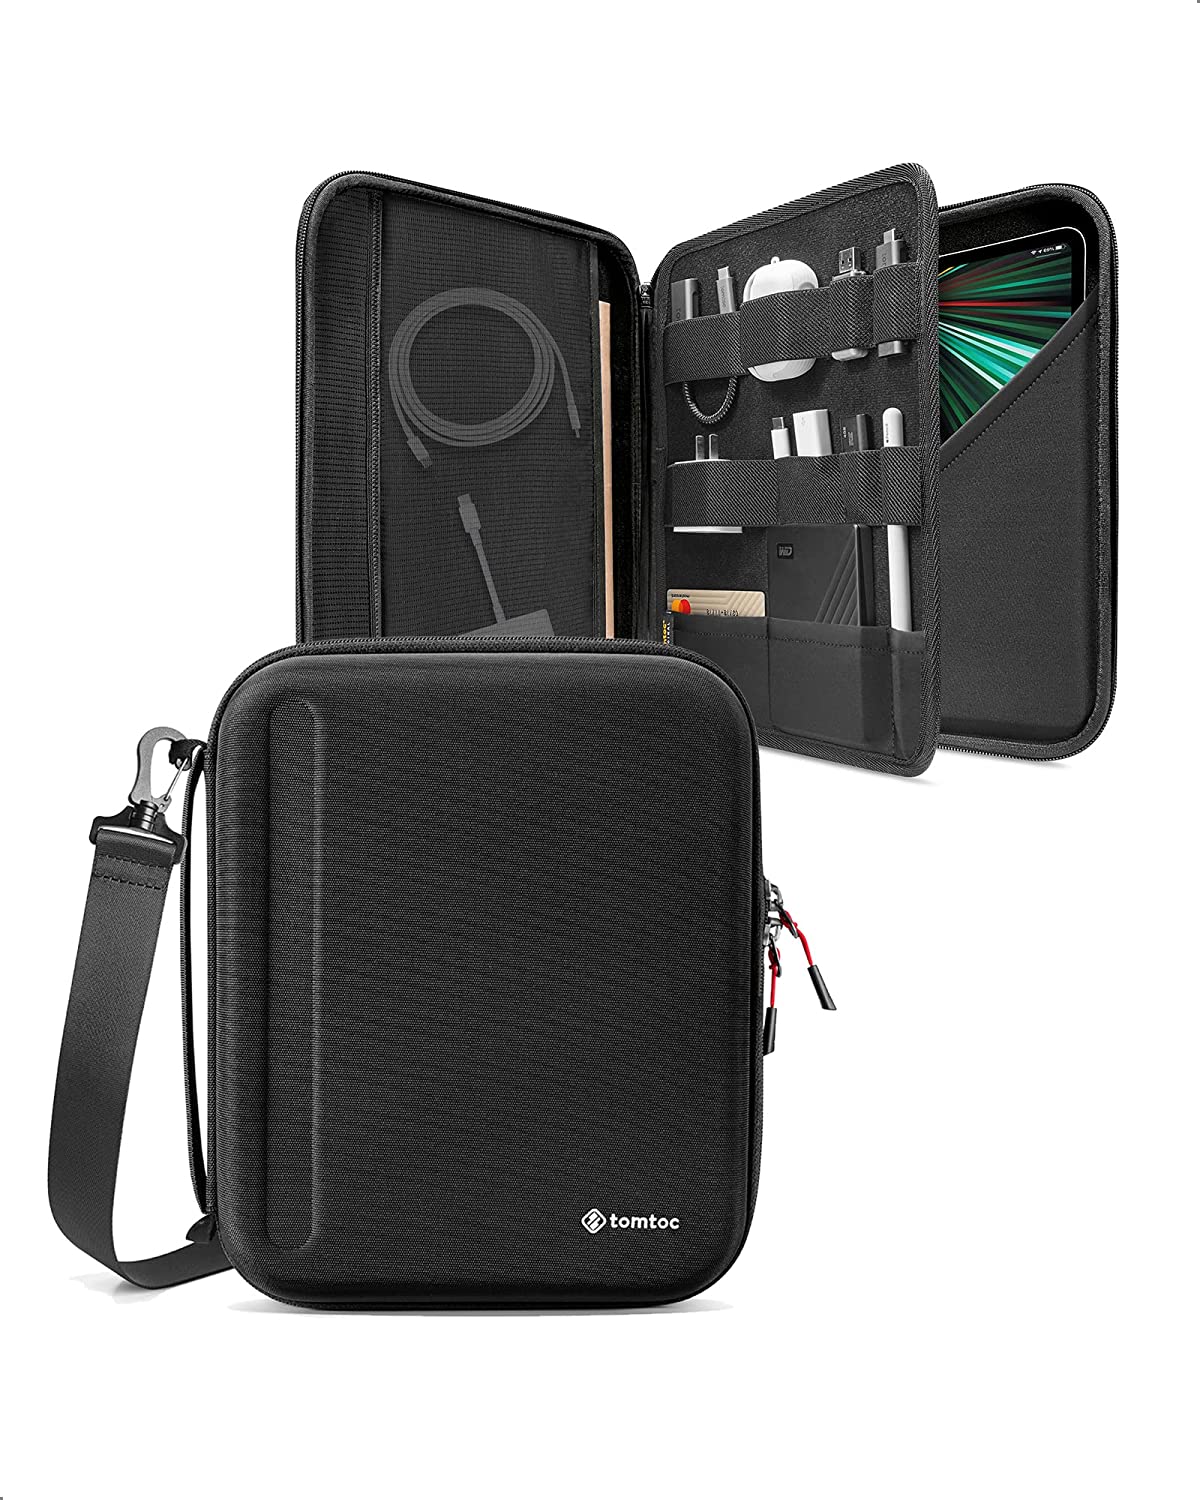 Tomtoc FancyCase-A06 iPad Case with Strap Black - Blink.sa.com